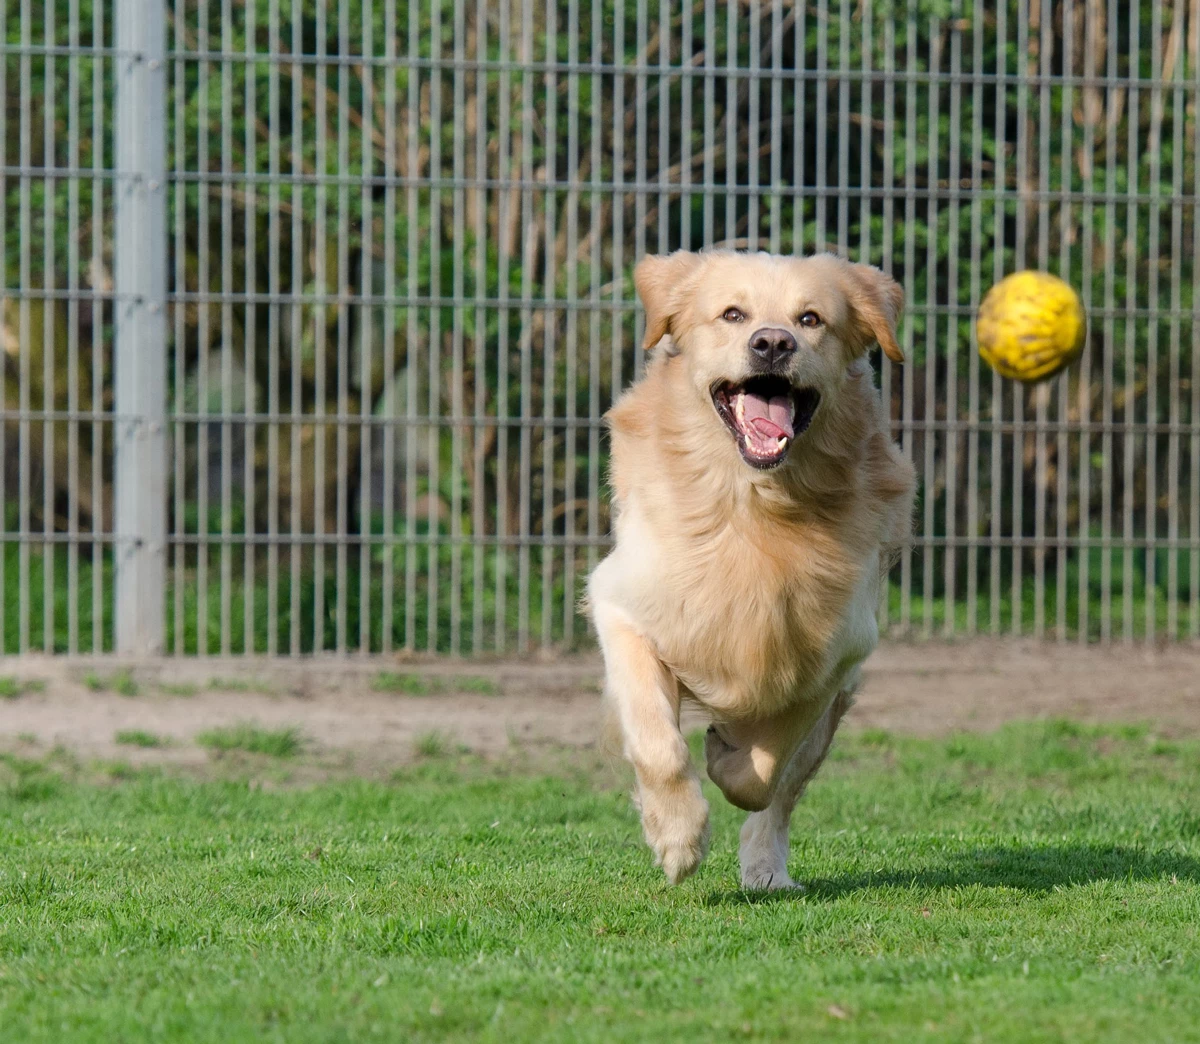 A dog chasing a ball in a fenced grassy area